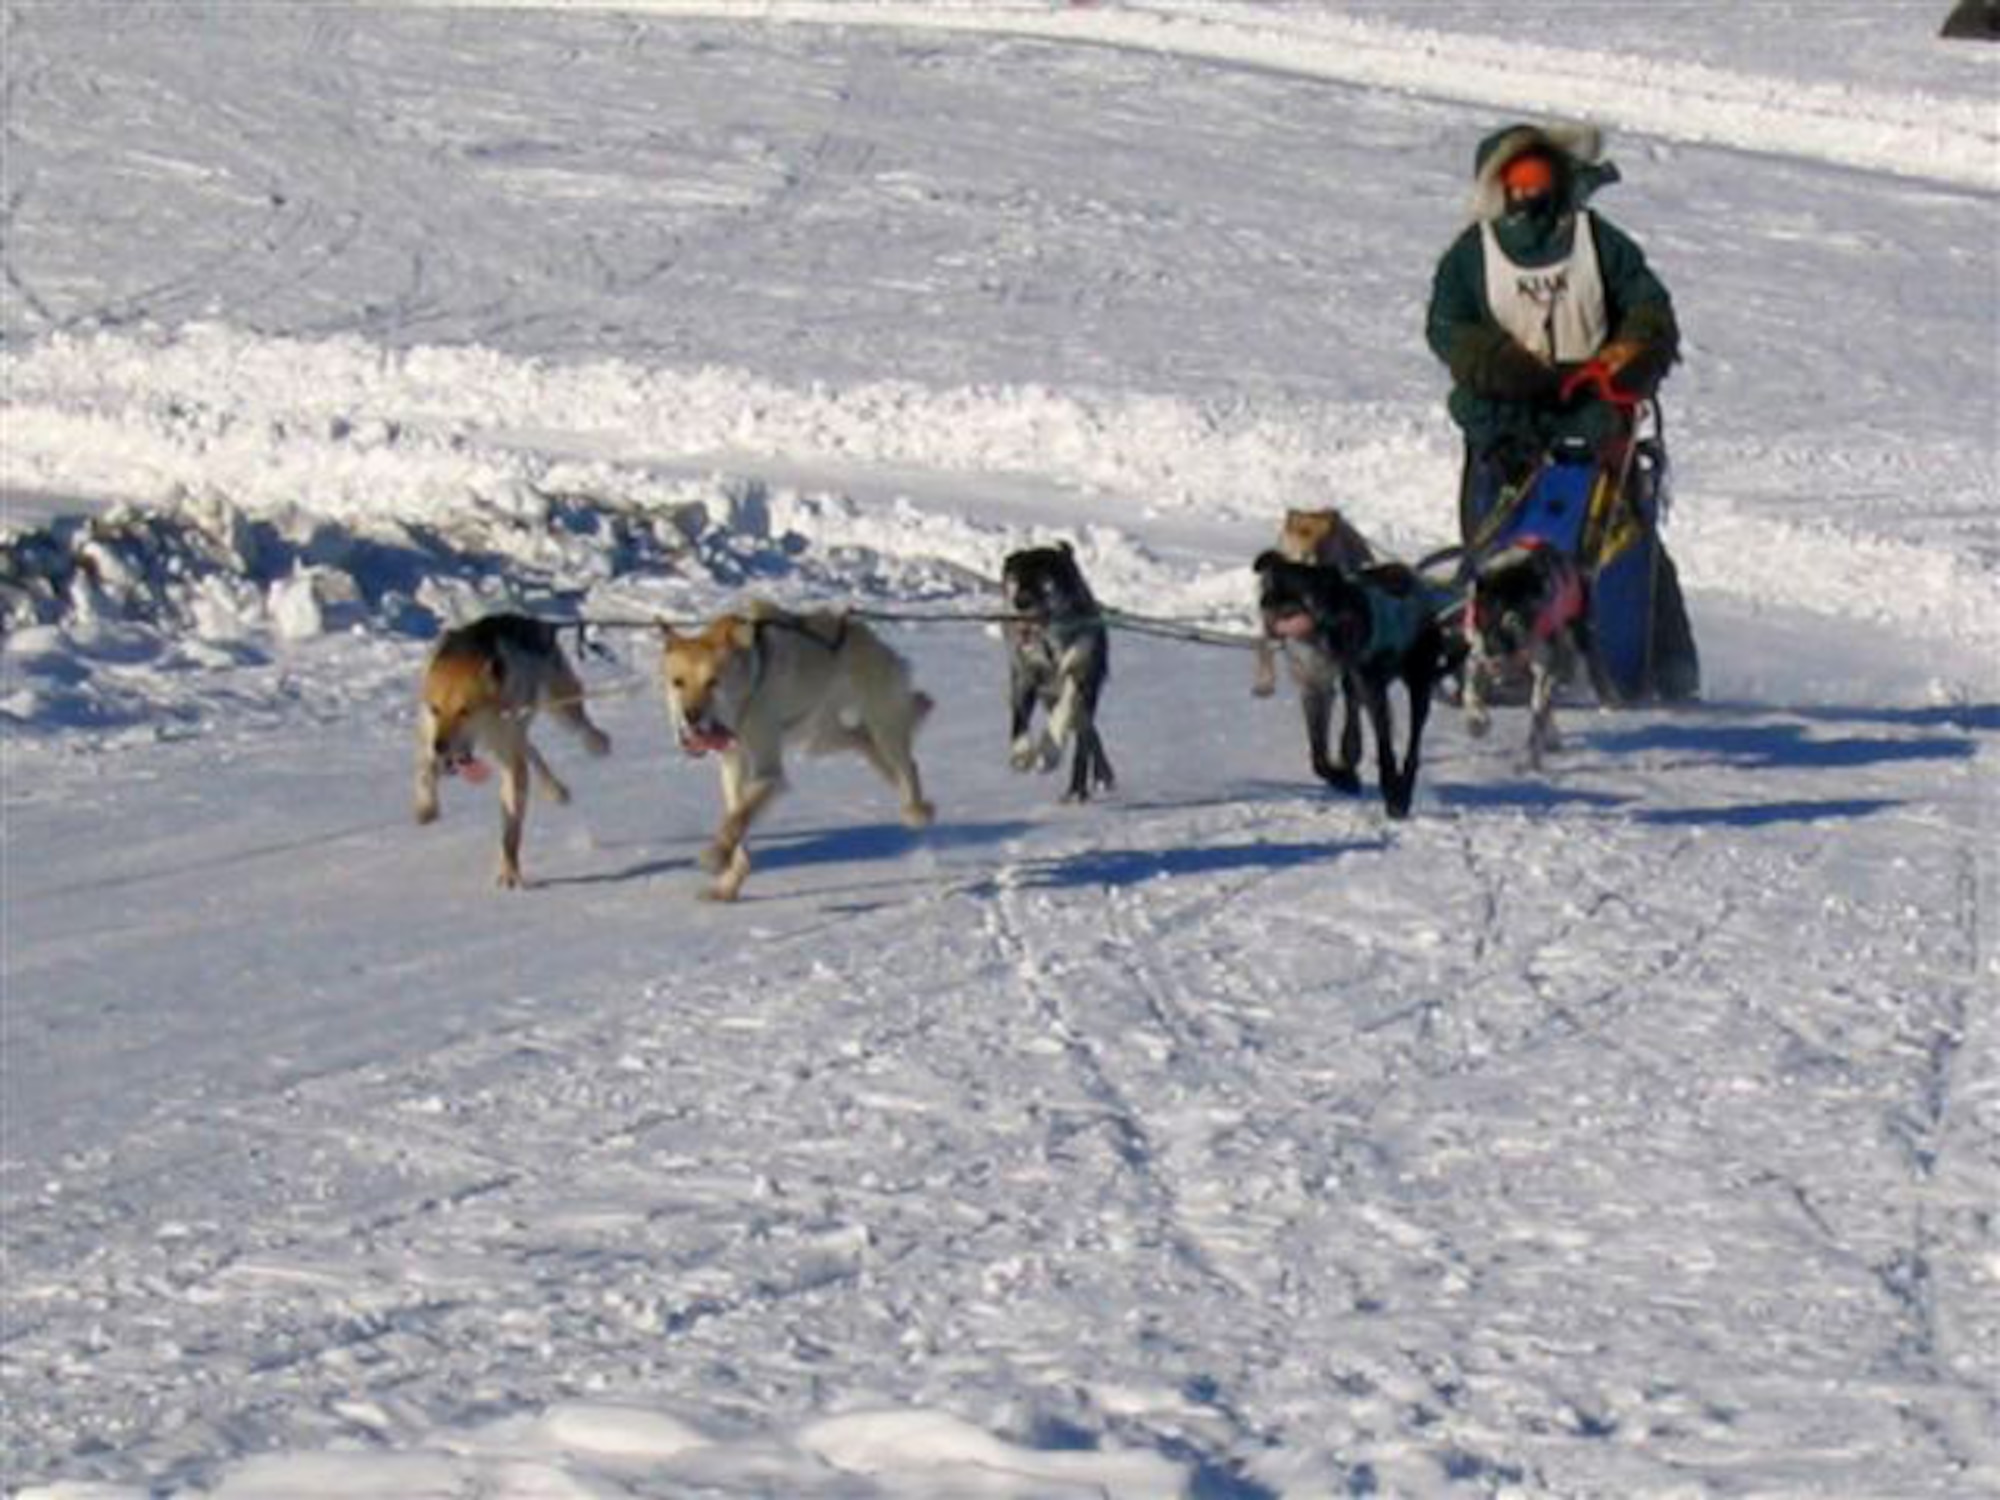 A musher and his dog sled team race past a checkpoint Feb. 24 during the Yukon Quest. The Yukon Quest is a 1,000-mile international sled dog race held annually in Alaska. Mushers race through territory from Whitehorse to Fairbanks. Airmen from Eielson helped man the final check-point, North Pole Dog Drop. (U.S. Air Force photo/Master Sgt. Robert Wieland) 